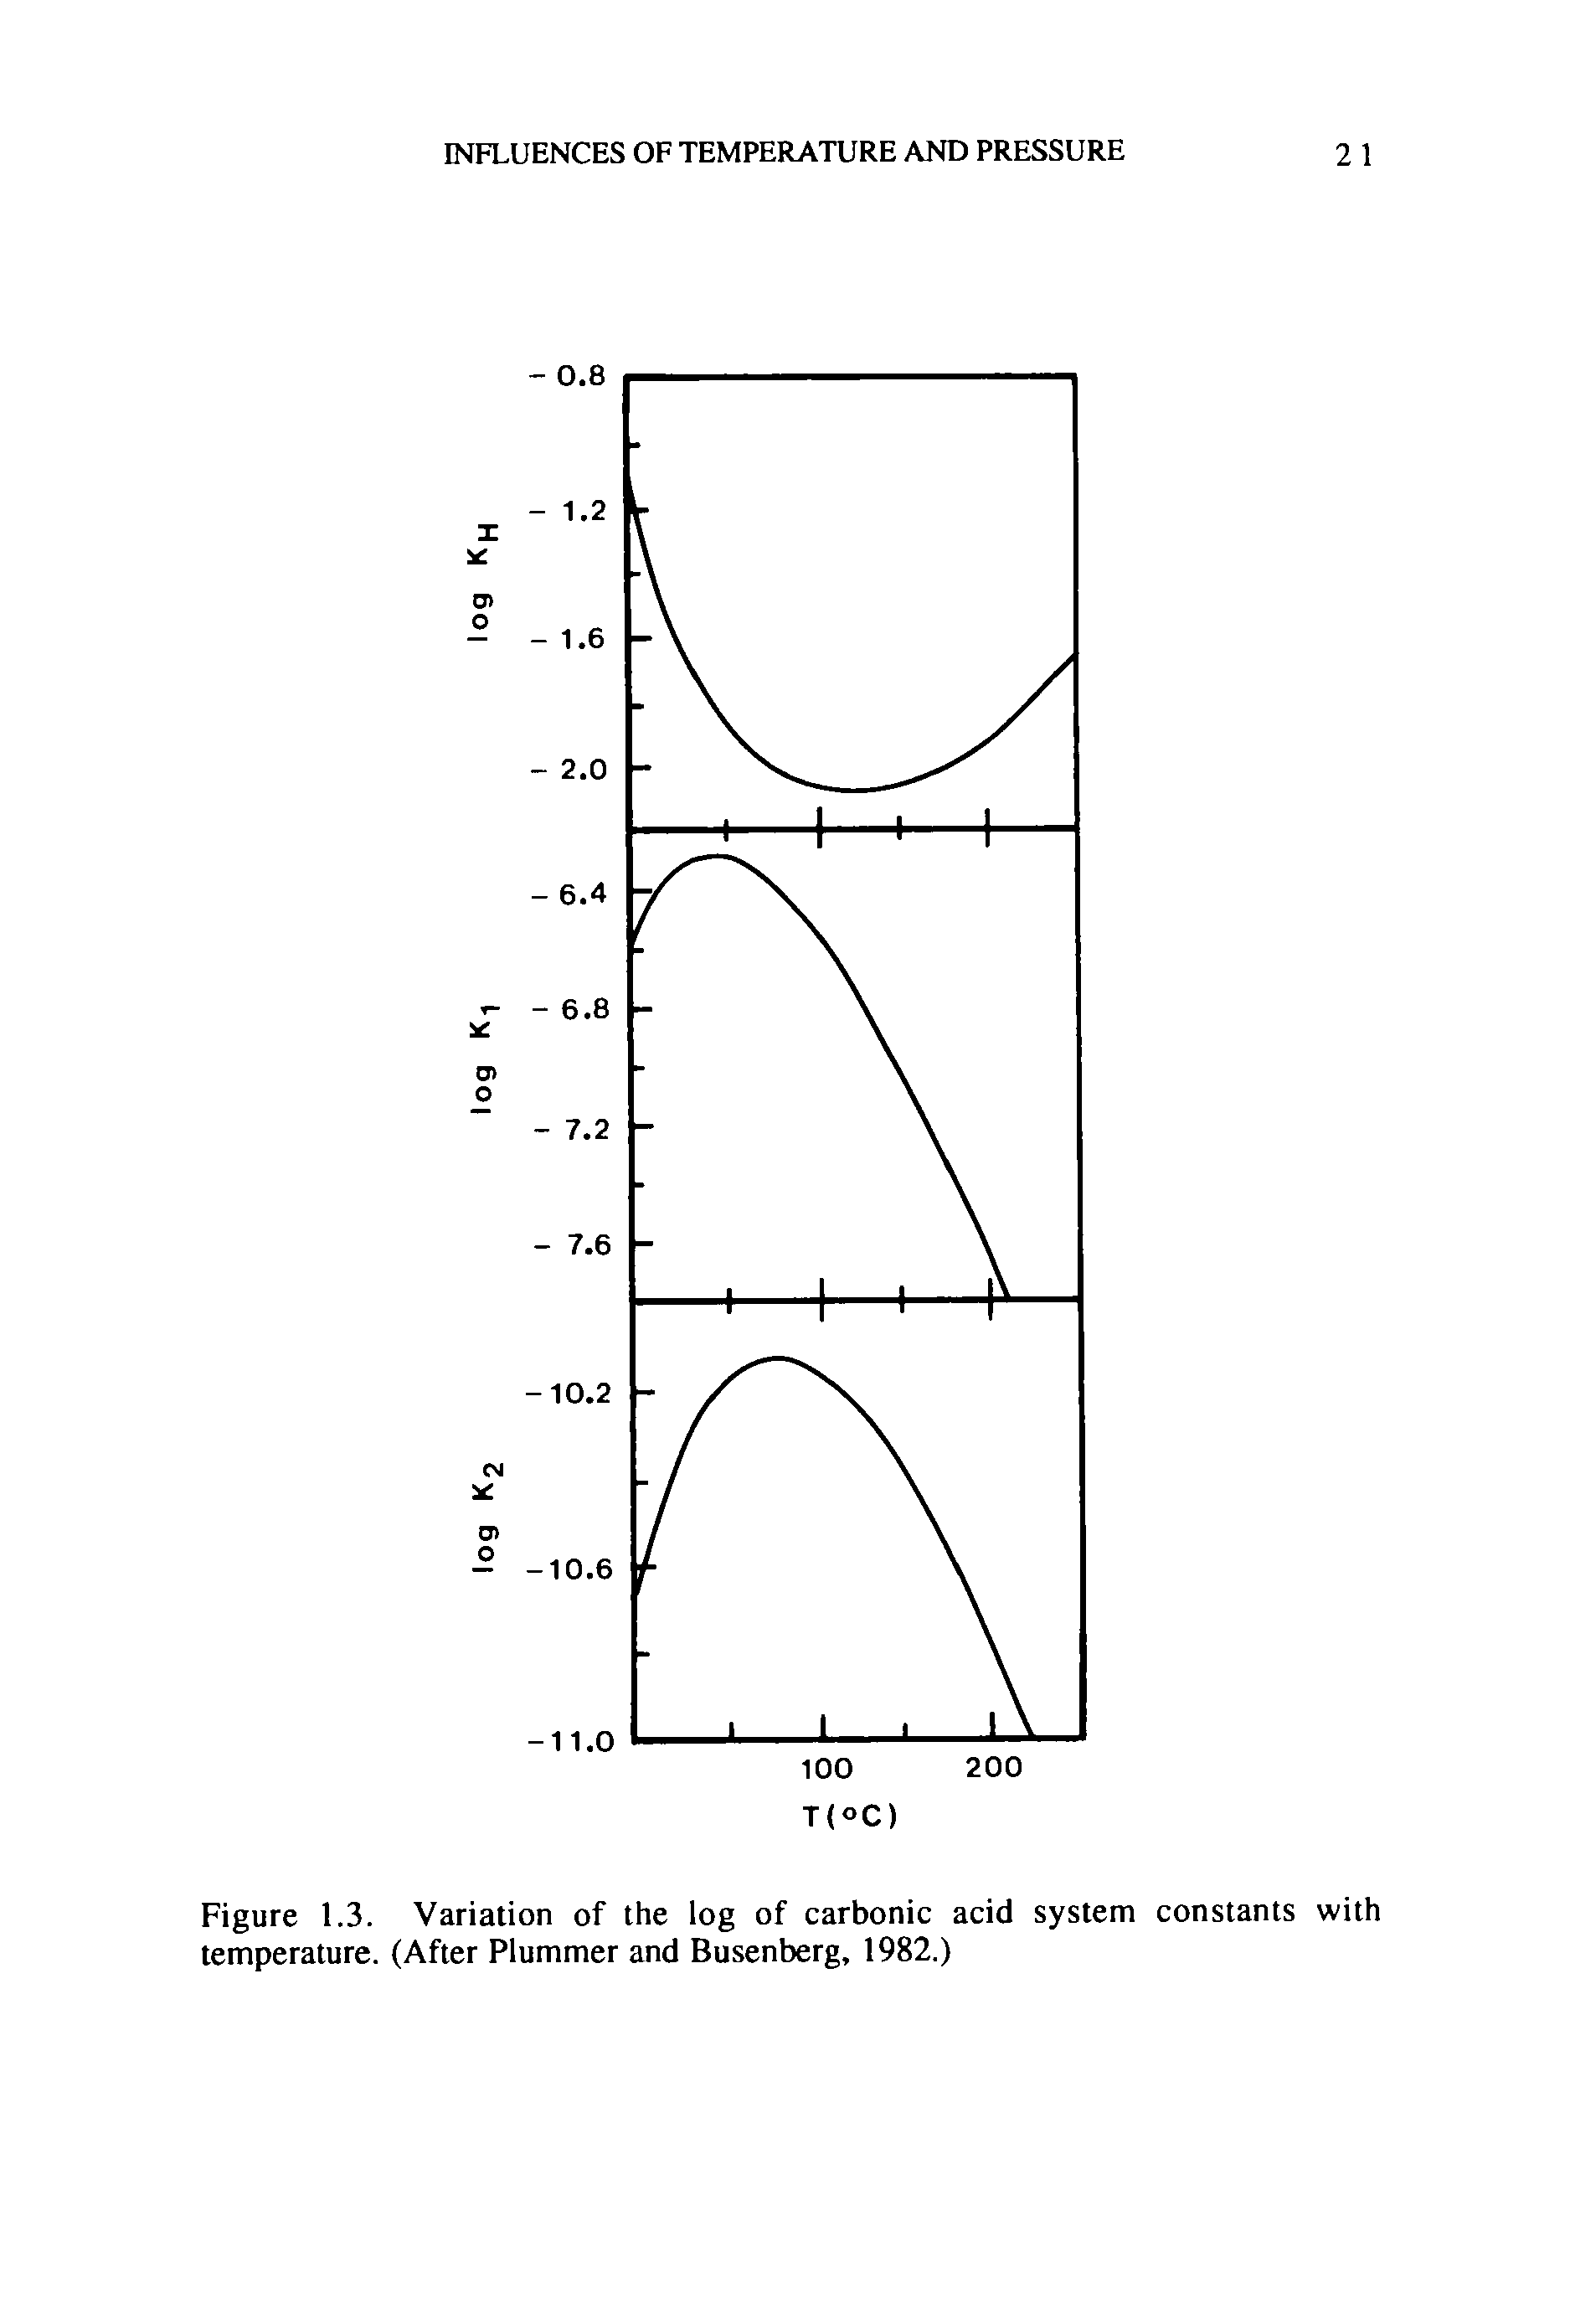 Figure 1.3. Variation of the log of carbonic acid system constants with temperature. (After Plummer and Busenberg, 1982.)...